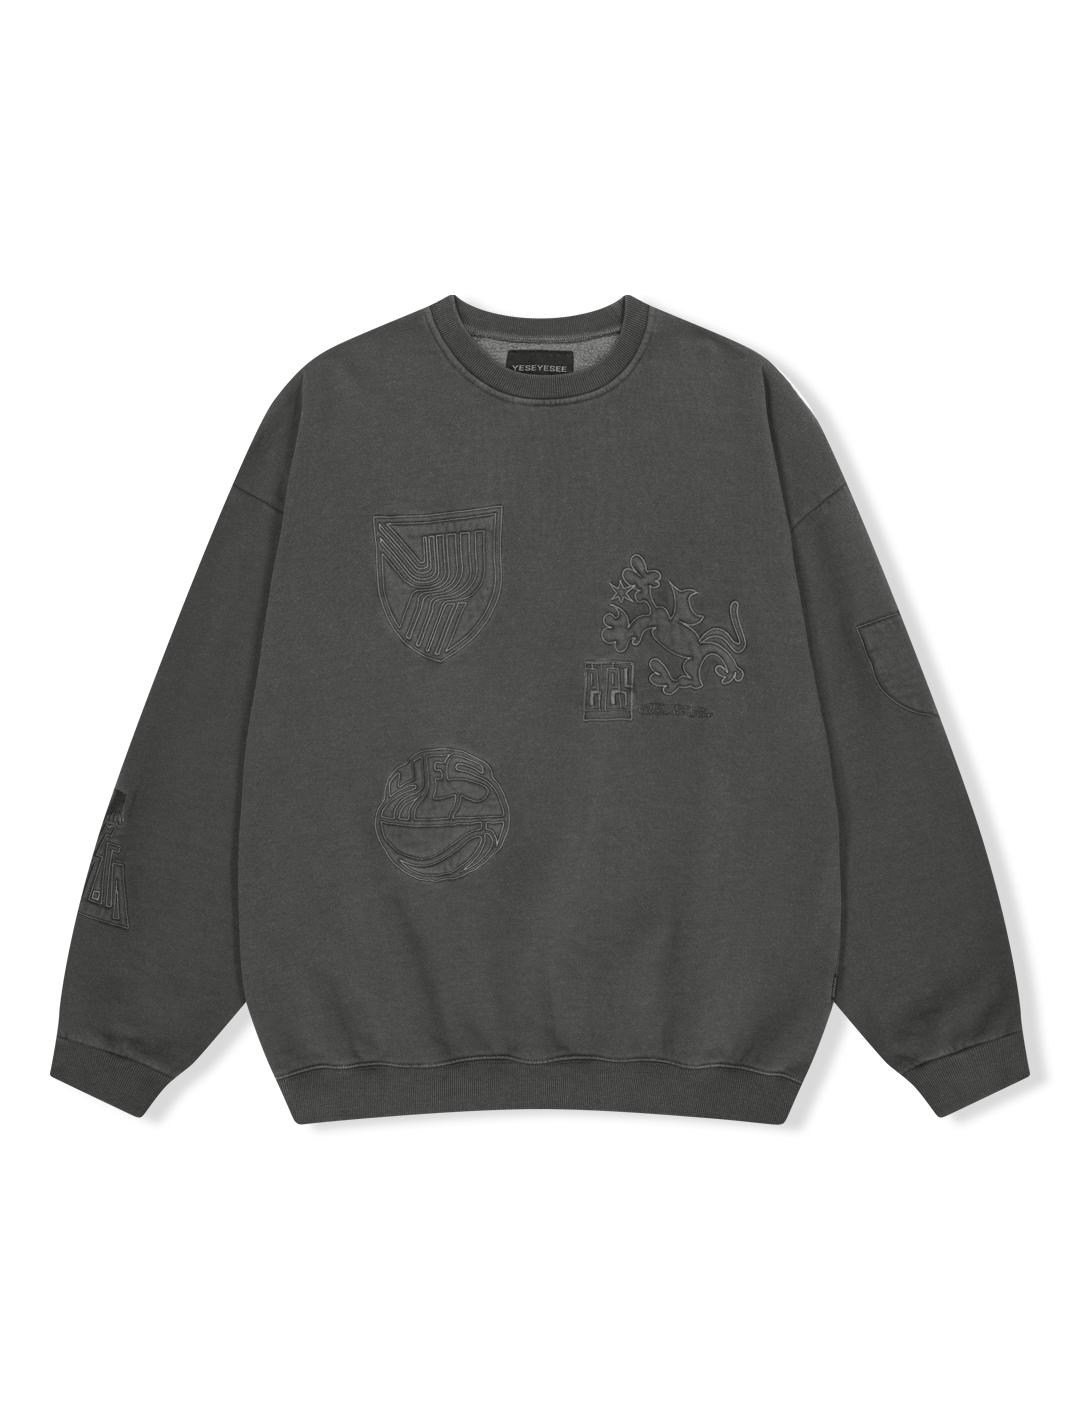 Y.E.S Pigment Embroidery Sweatshirt Charcoal